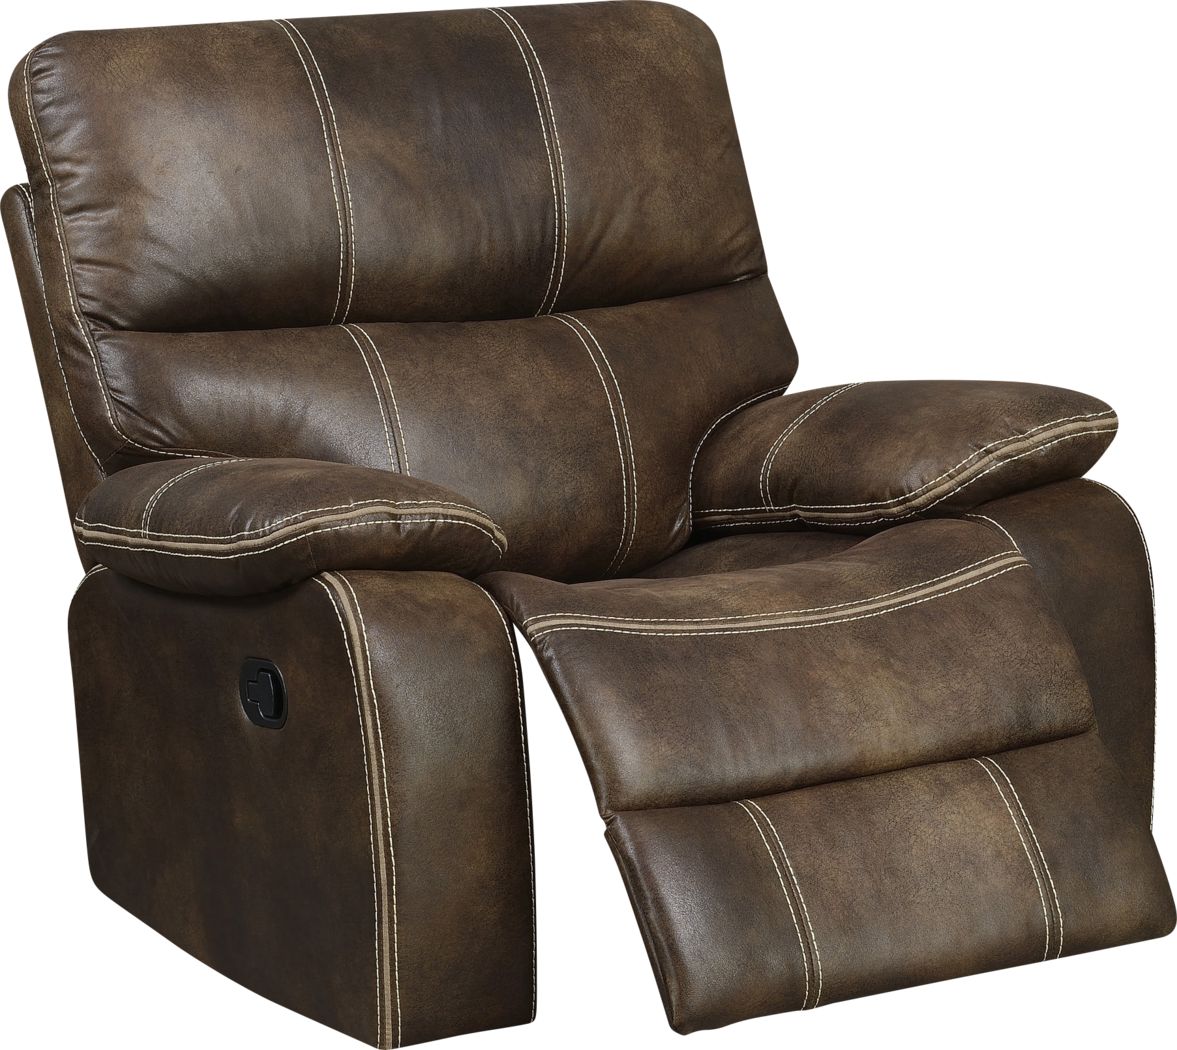 Leather Fabric Brown Reclining Chairs, Brown Leather Rocker Recliner